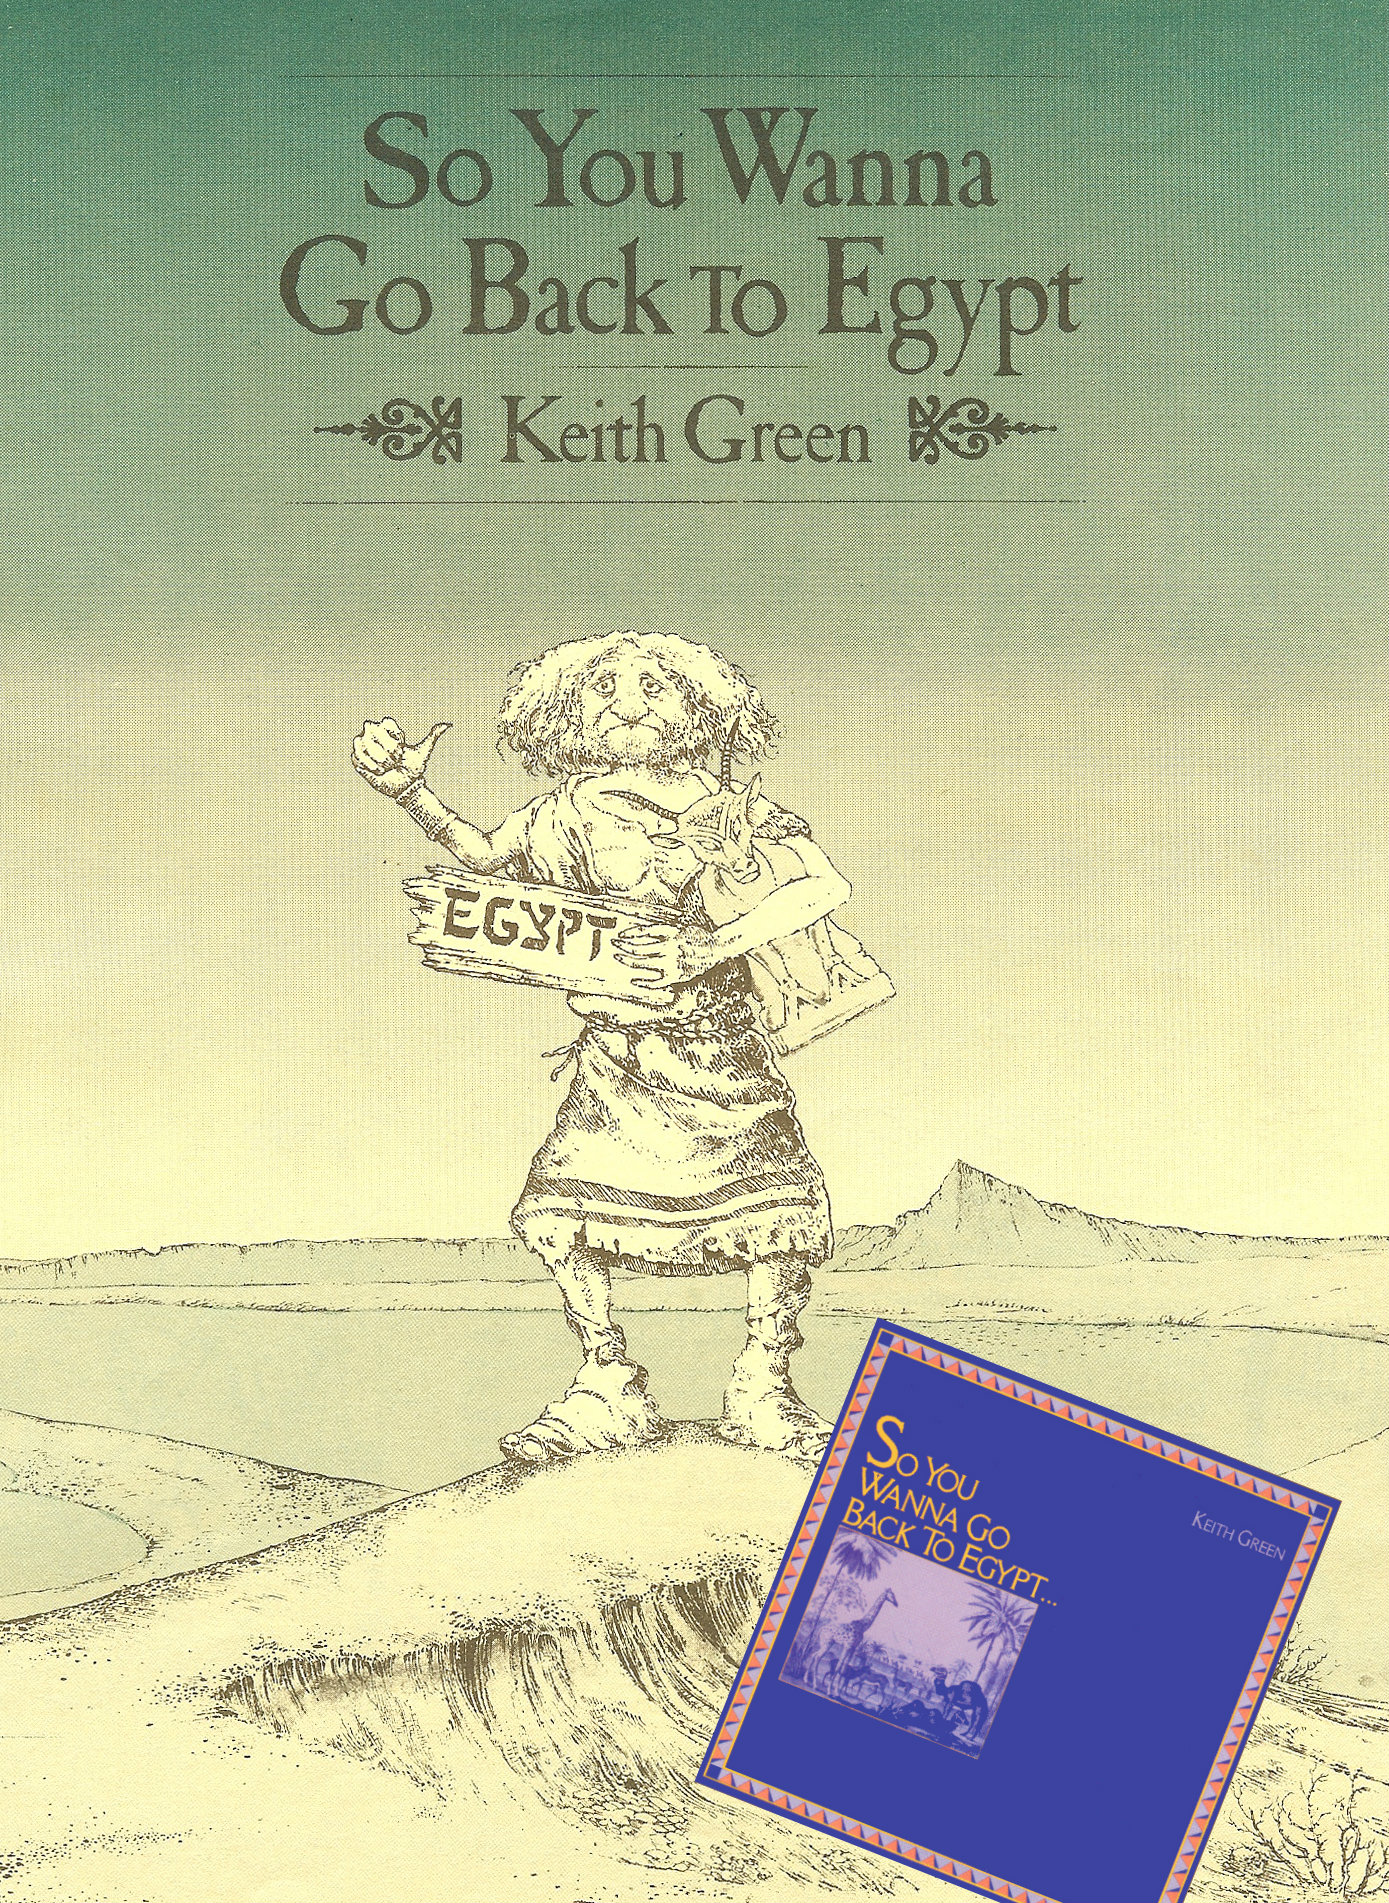 Back to Egypt with album art